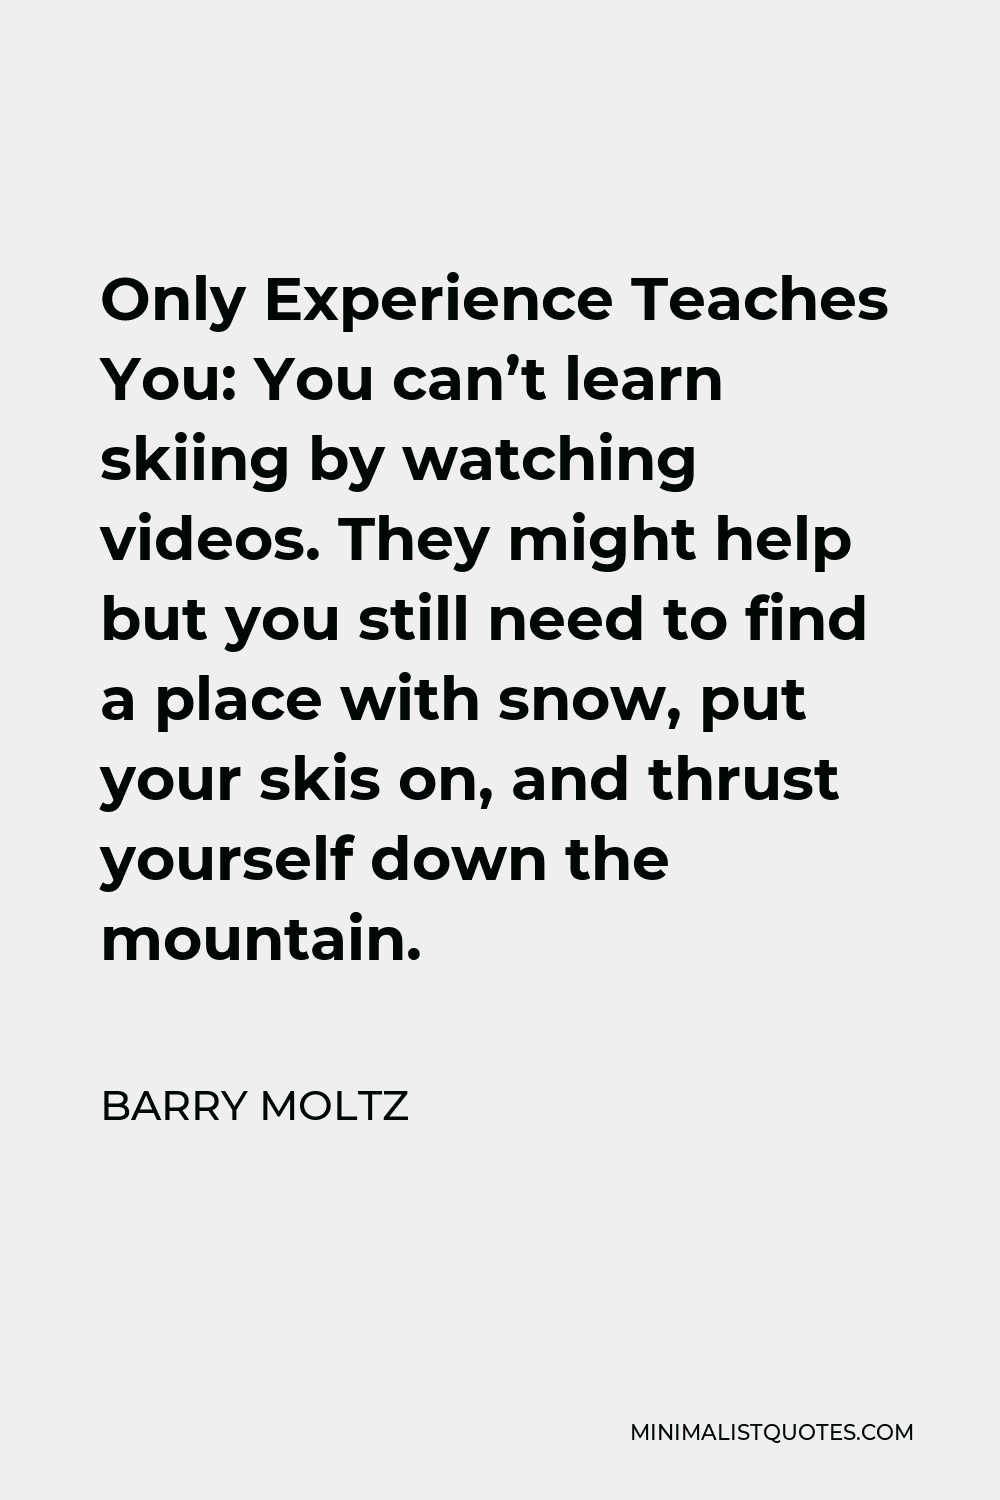 Barry Moltz Quote - Only Experience Teaches You: You can’t learn skiing by watching videos. They might help but you still need to find a place with snow, put your skis on, and thrust yourself down the mountain.